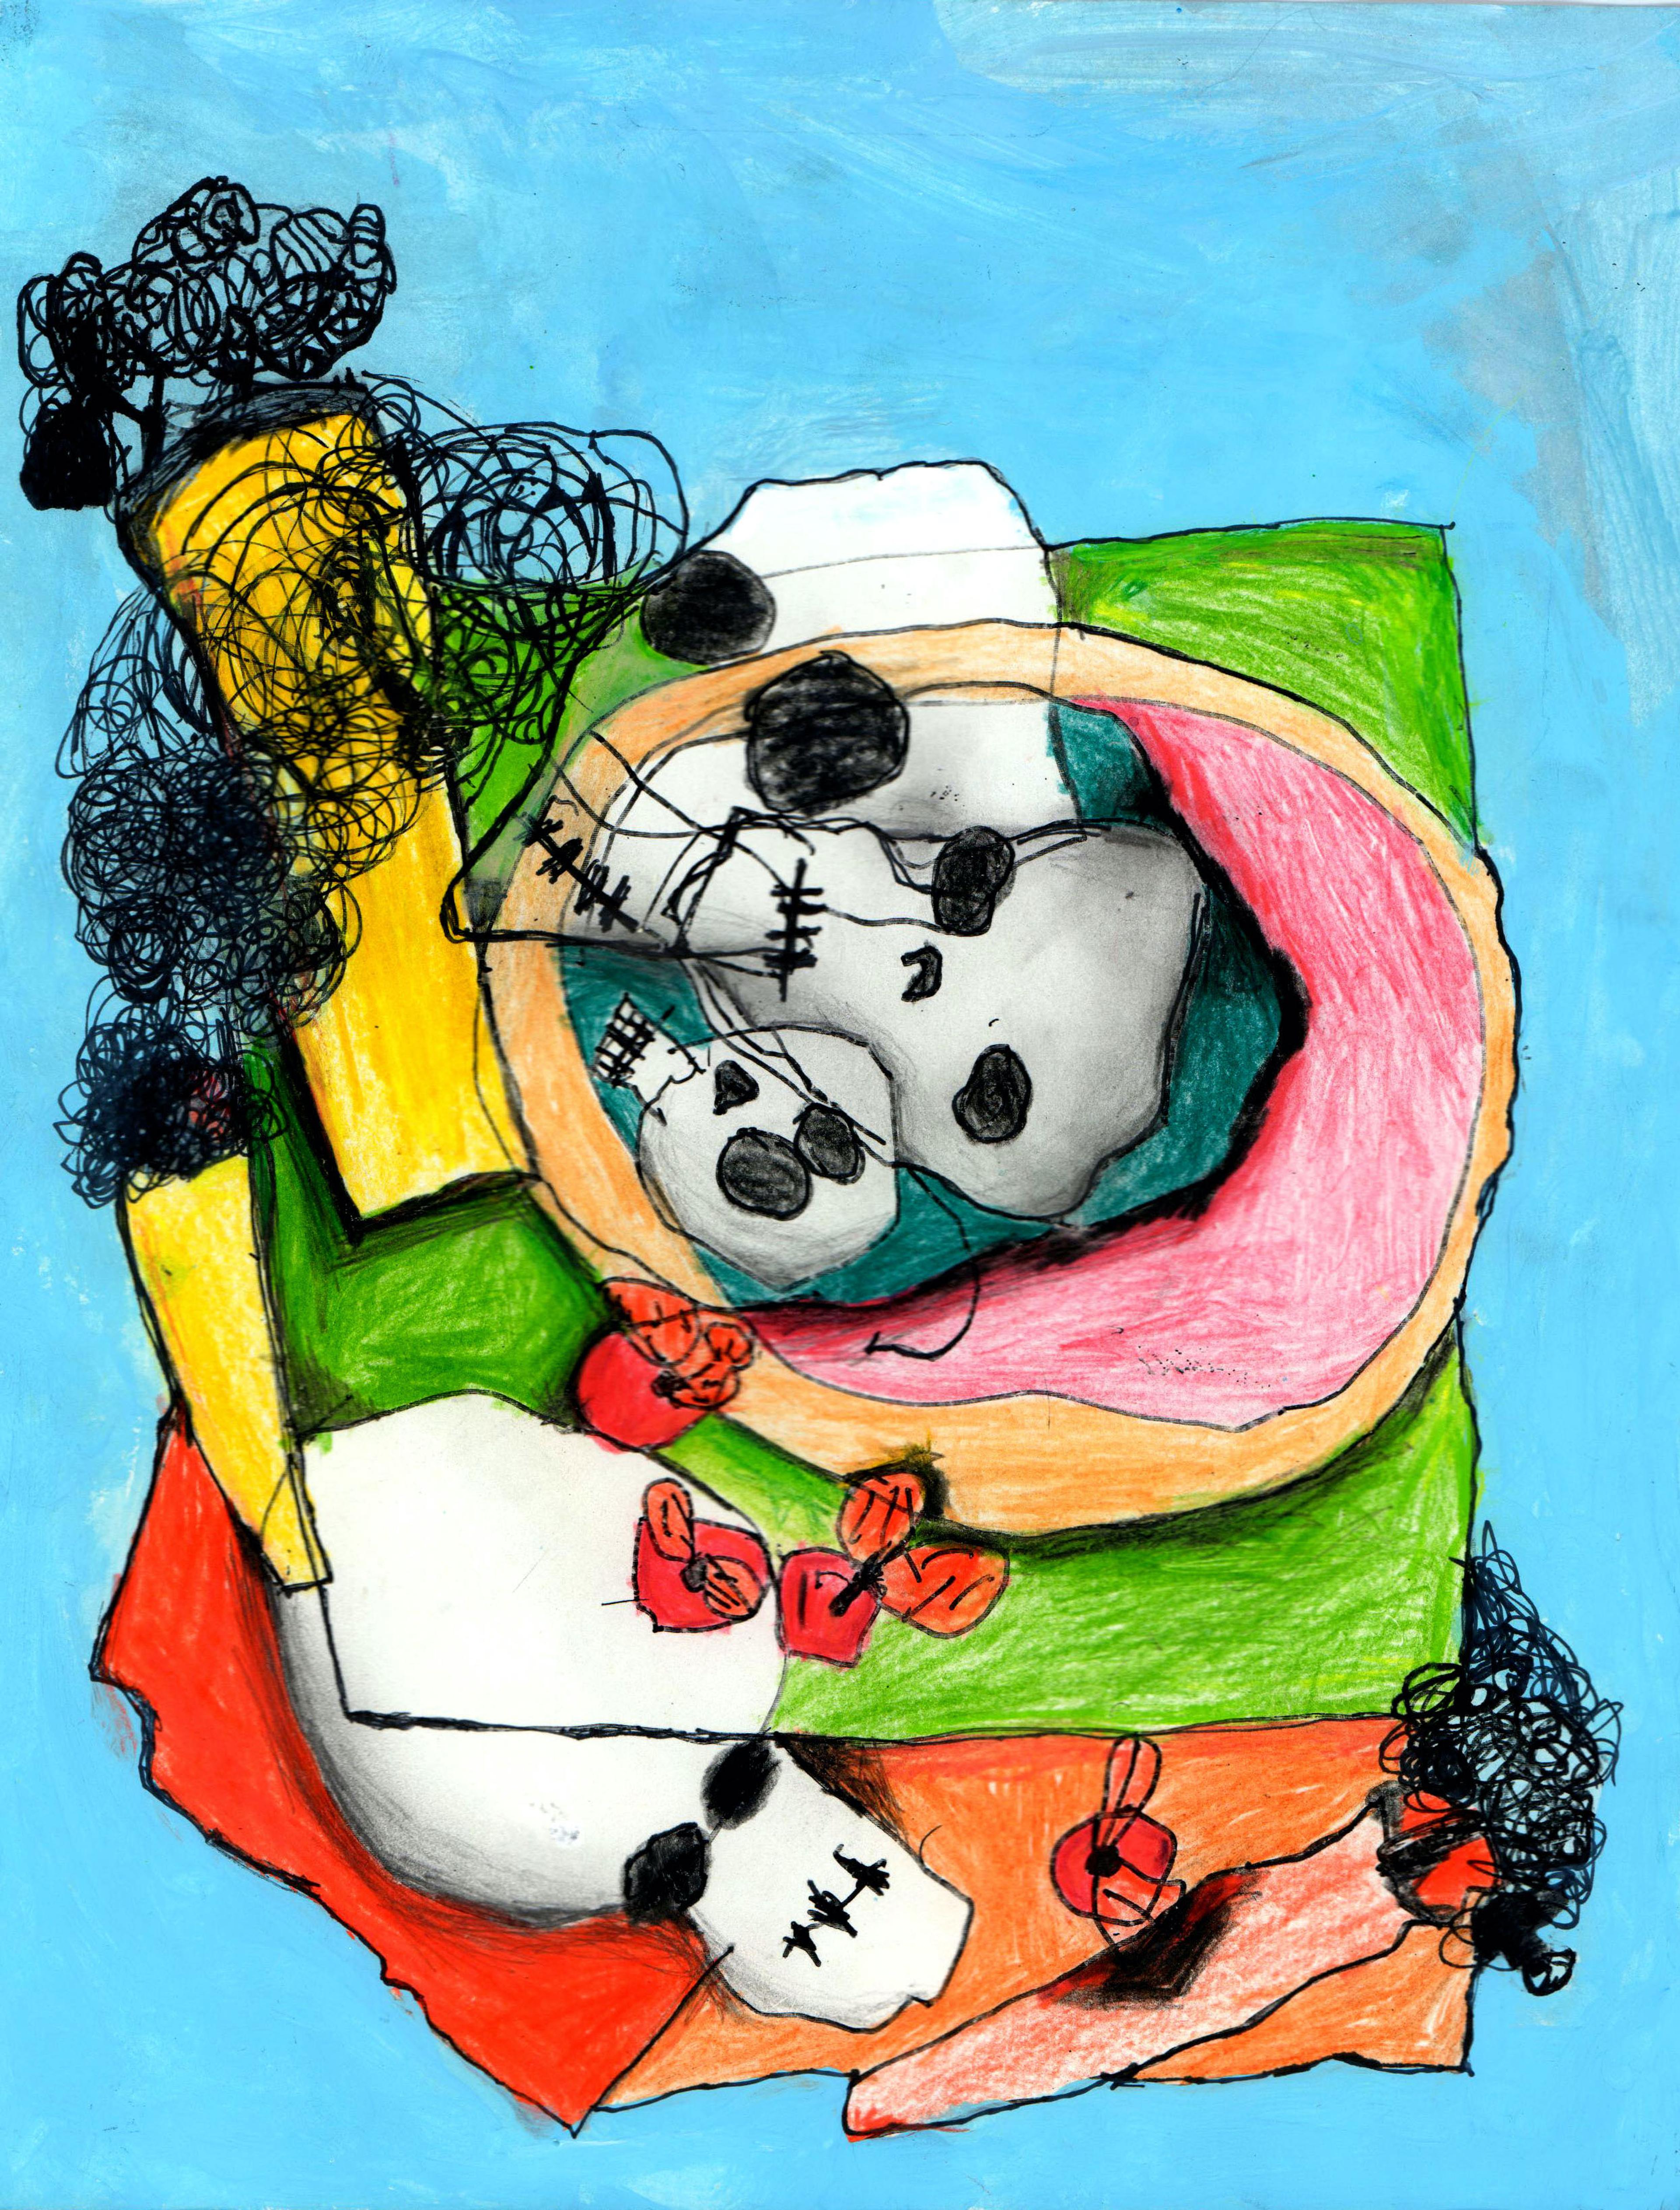 Abstract mixed-media illustration of a Cubist brunch table setting on a light blue backdrop, as seen from above. A red plate with orange trim sits upon a green square mat with red and orange cloths emerging at the bottom. Long yellow vegetables sit to the left of the plate, while a large white skull and a smaller white skull sit inside the plate. A third skull overlaps the edges of the plate at top, and a fourth large skull overlaps the green mat and red cloth at bottom. Small red vegetables ring the bottom of the plate. A long red vegetable sits at the bottom corner to the right on the orange cloth.